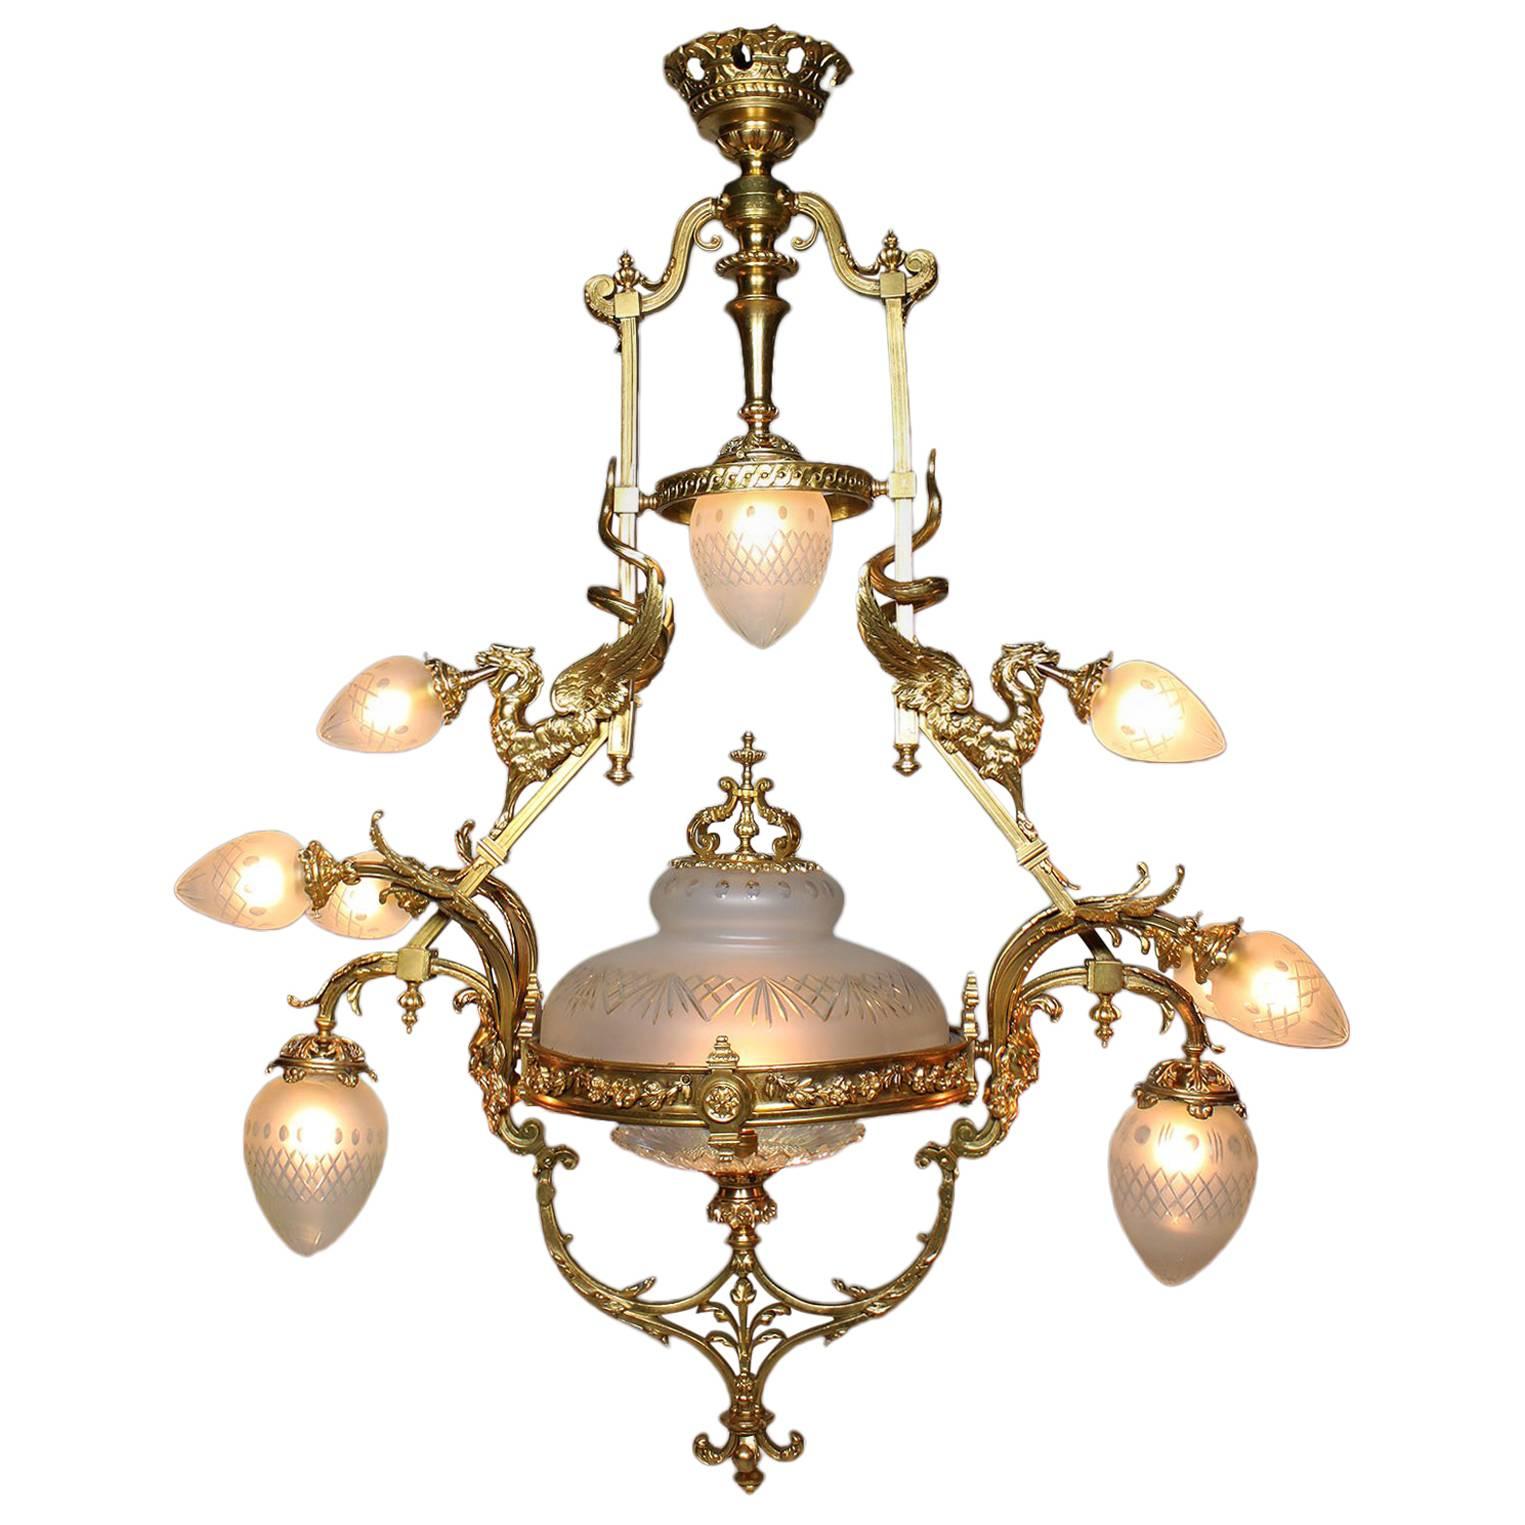 French Belle Epoque 19th-20th Century Neoclassical Style Gilt-Bronze Chandelier For Sale